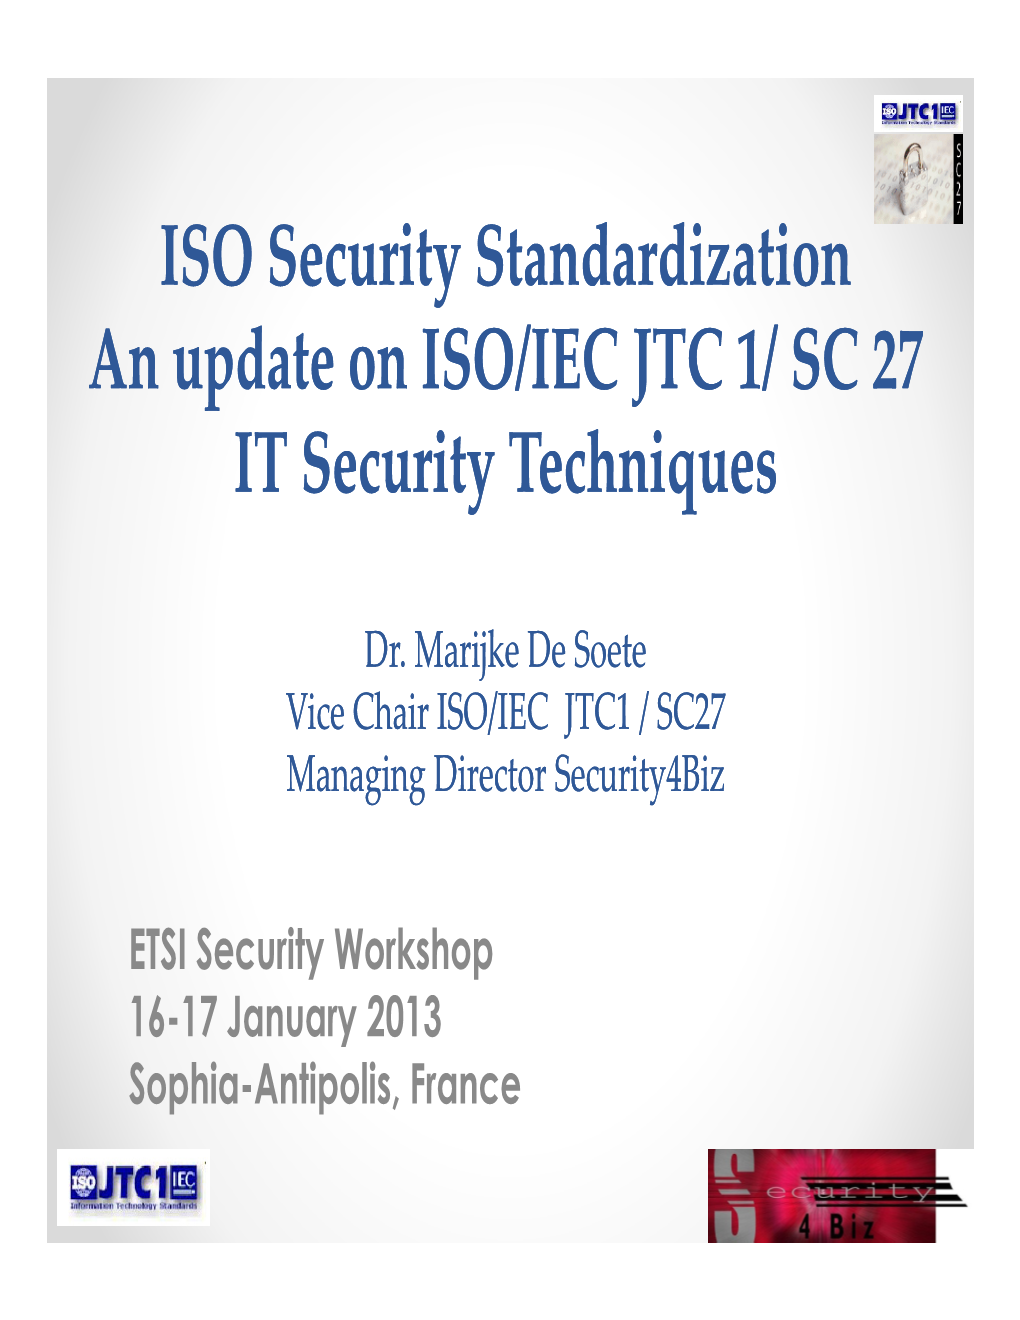 ISO Security Standardization an Update on ISO/IEC JTC an Update